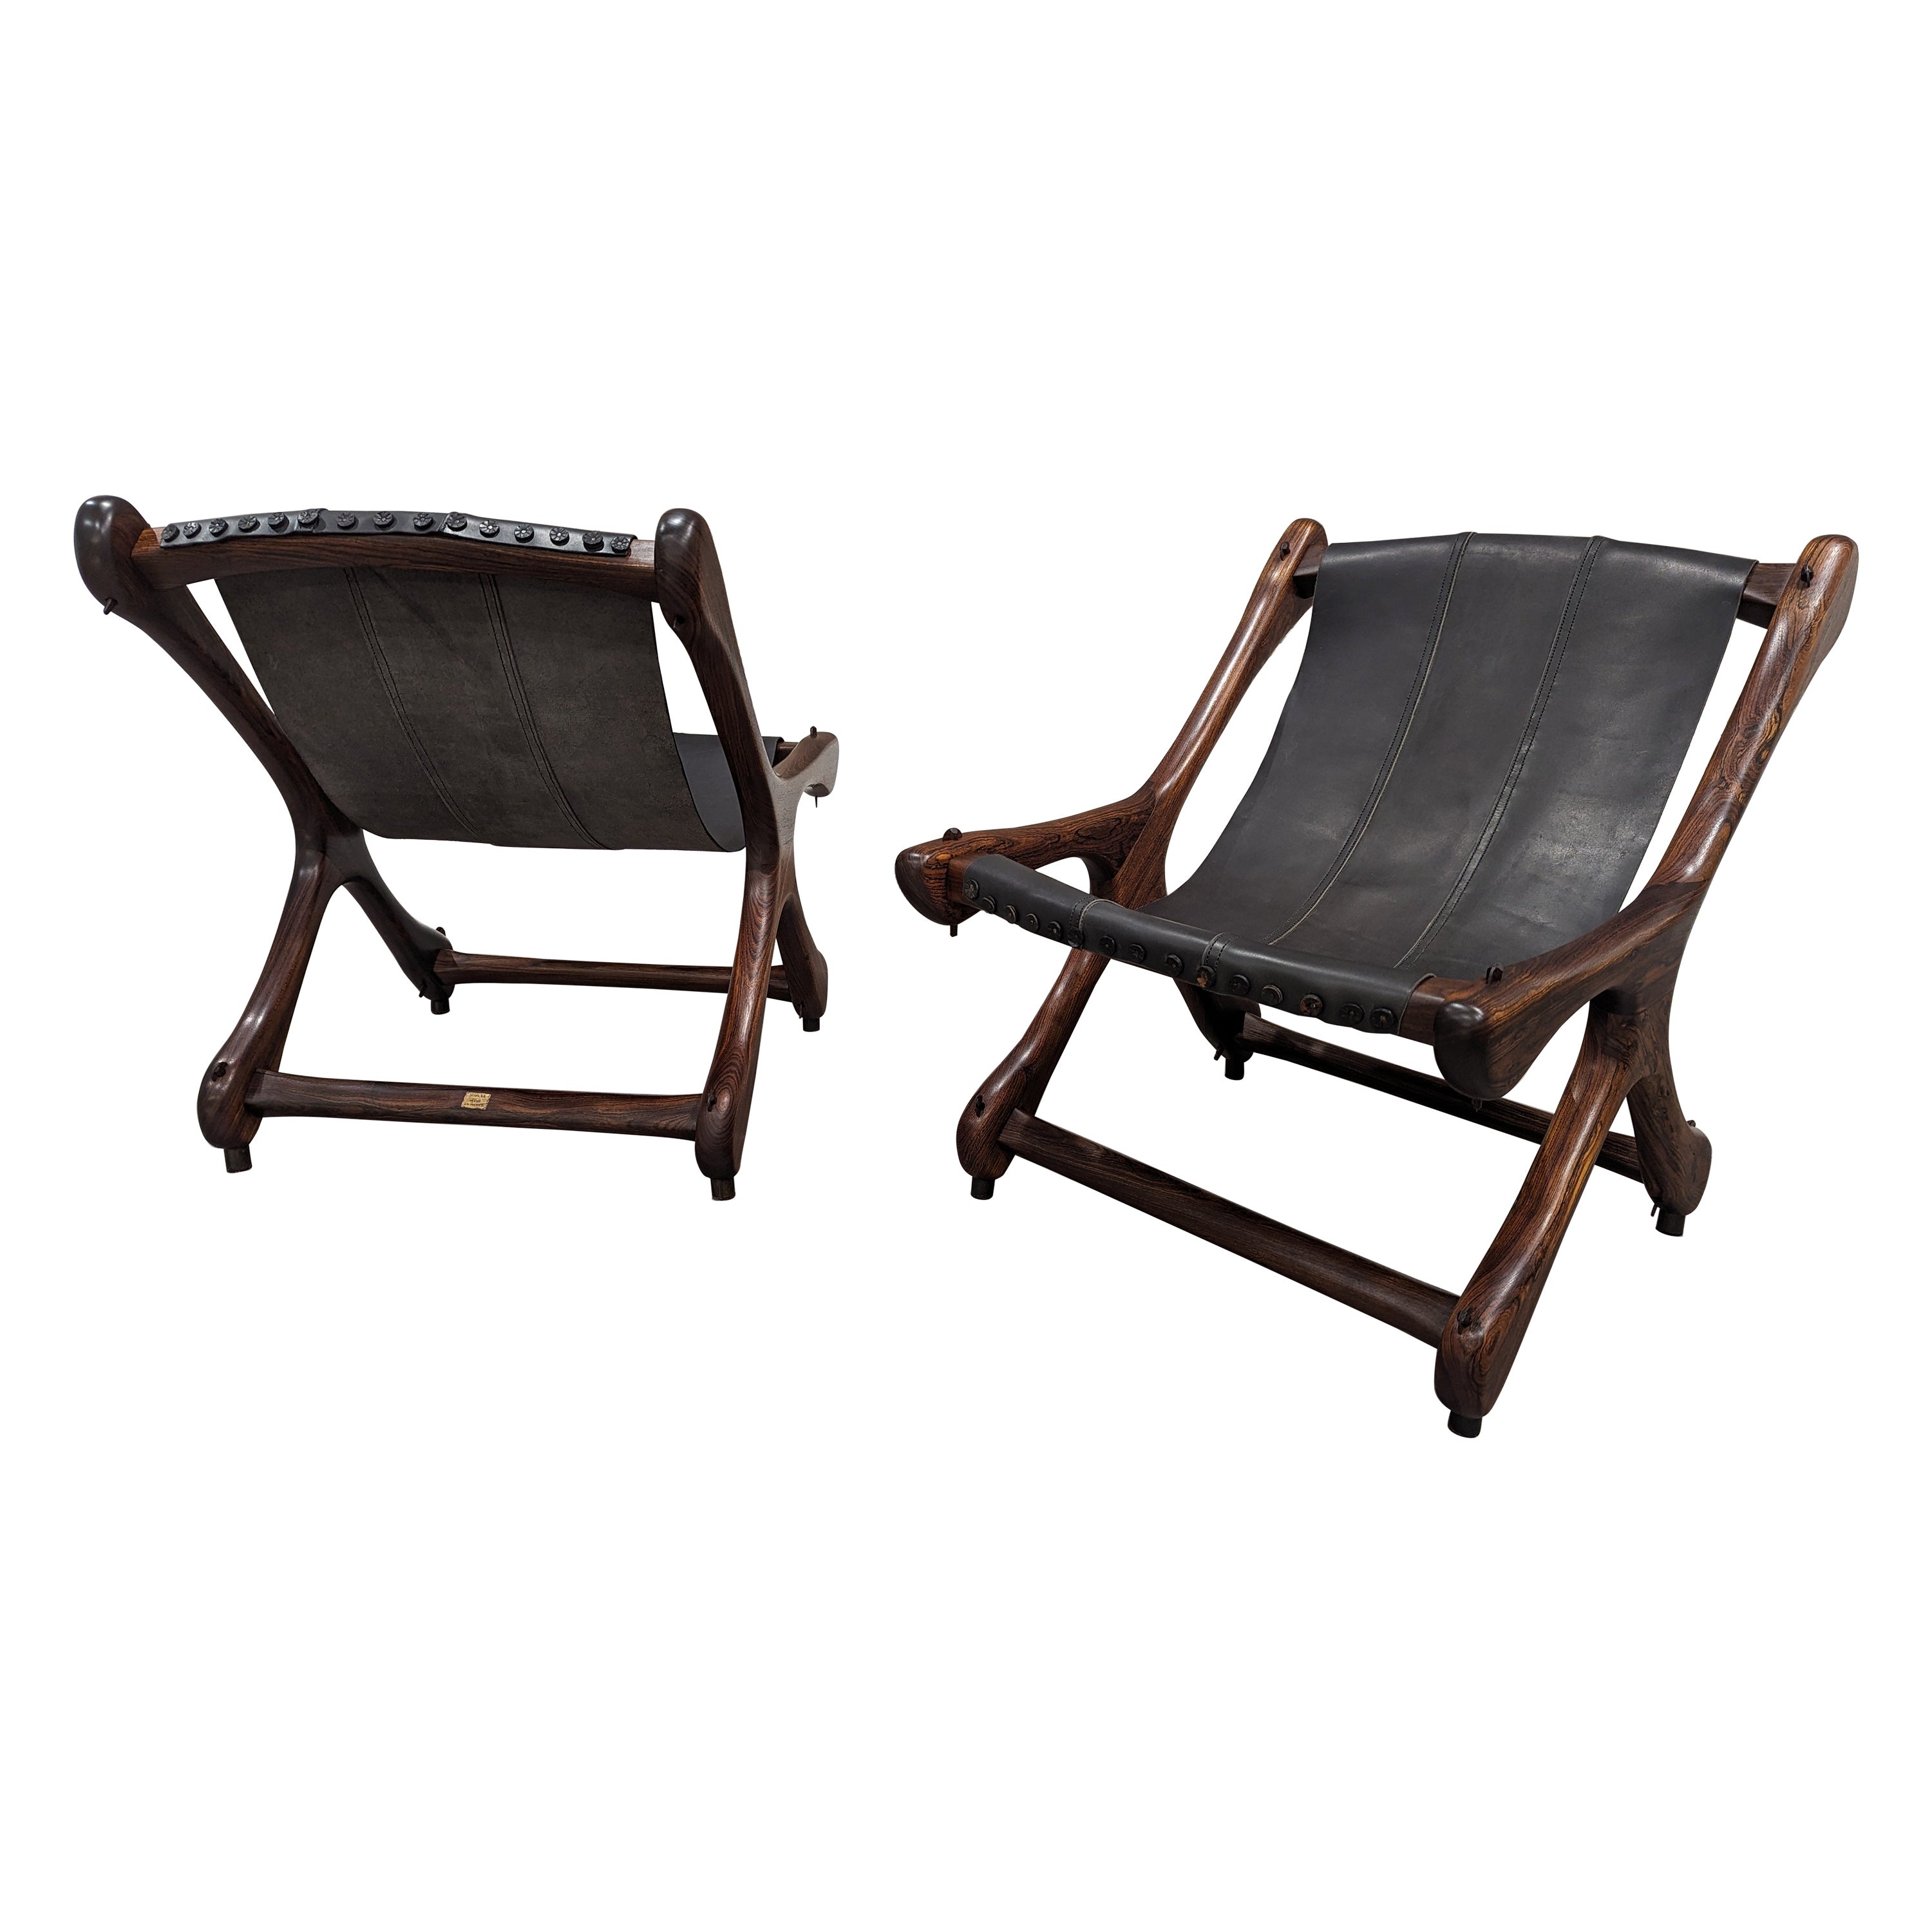 Don Shoemaker Sloucher Rosewood & Leather Sling Chairs for Señal, S.A., 1960s